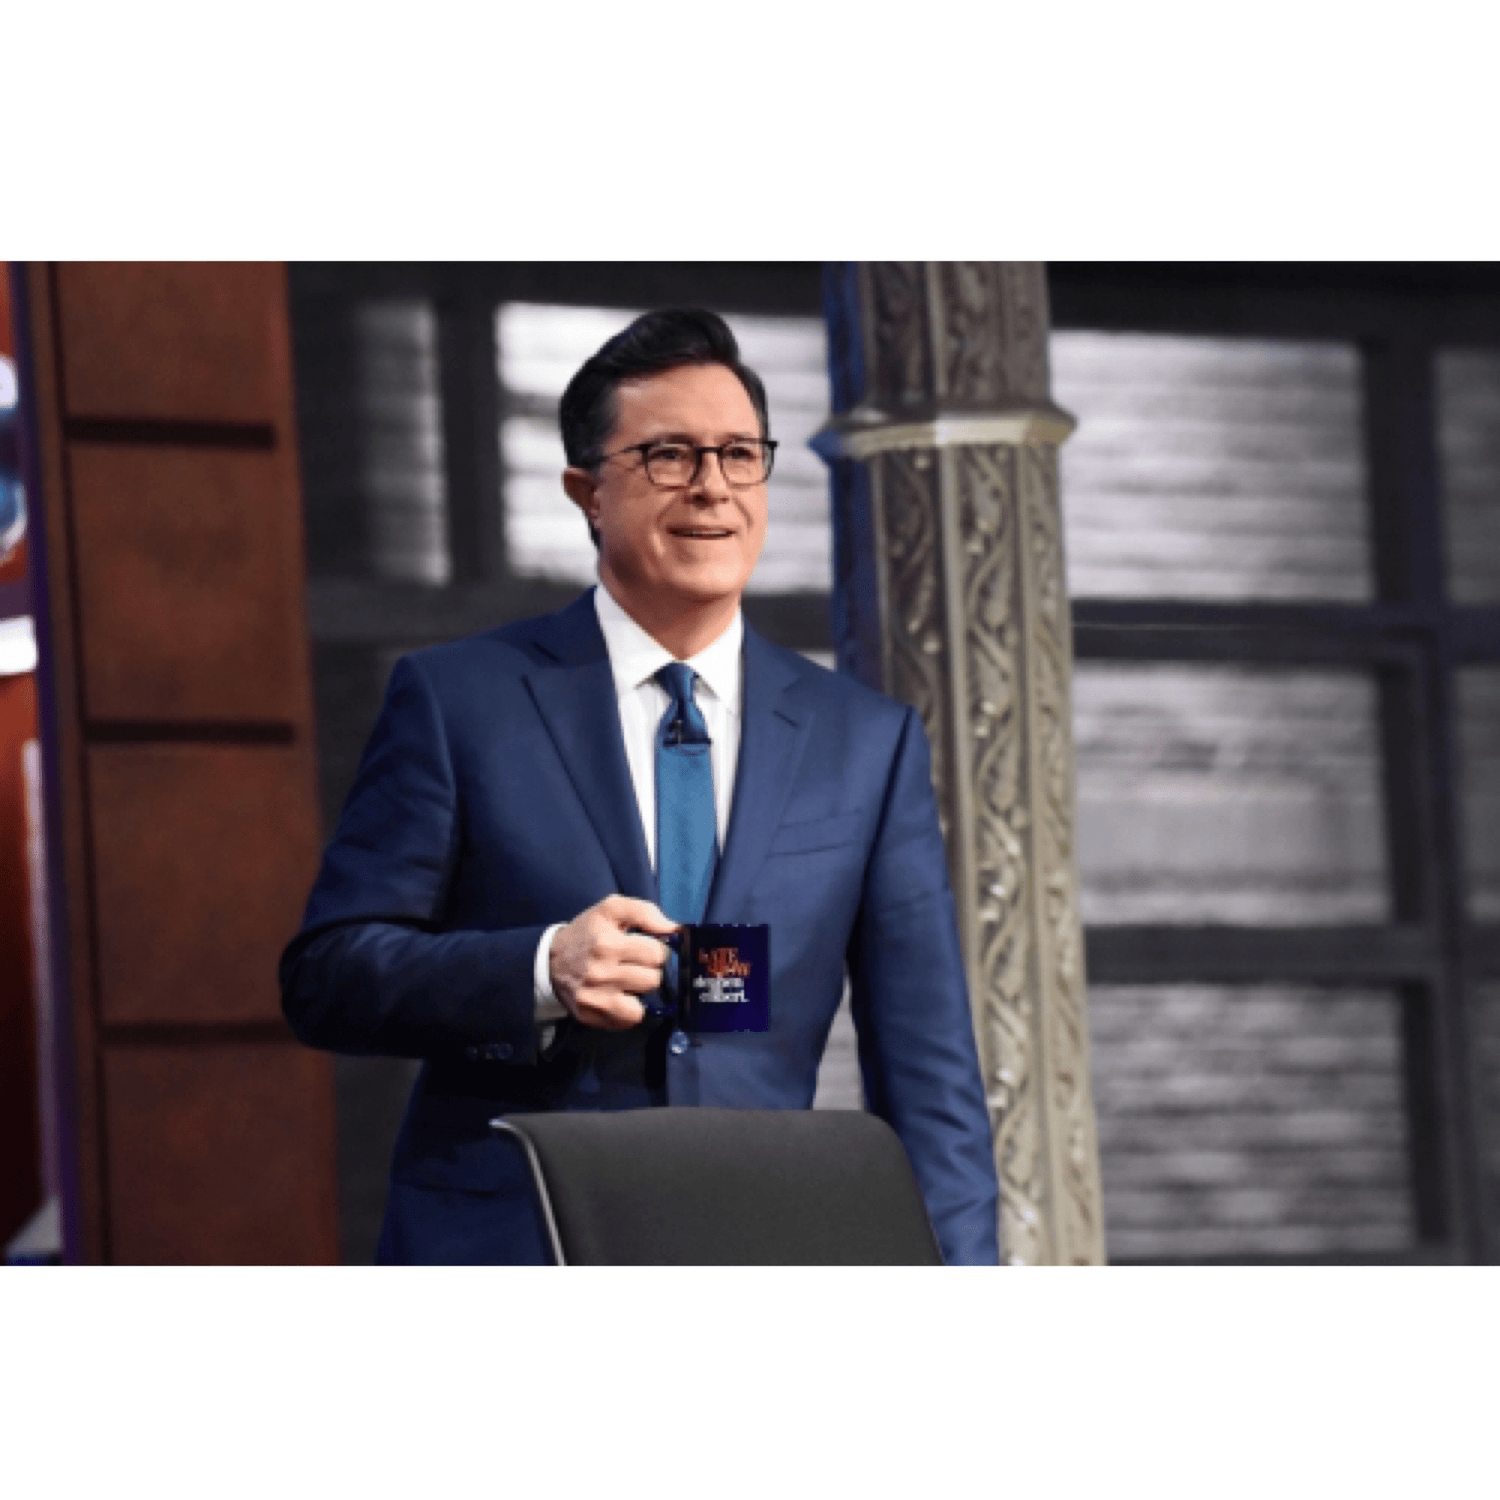 The Late Show with Stephen Colbert Official Mug - Paramount Shop